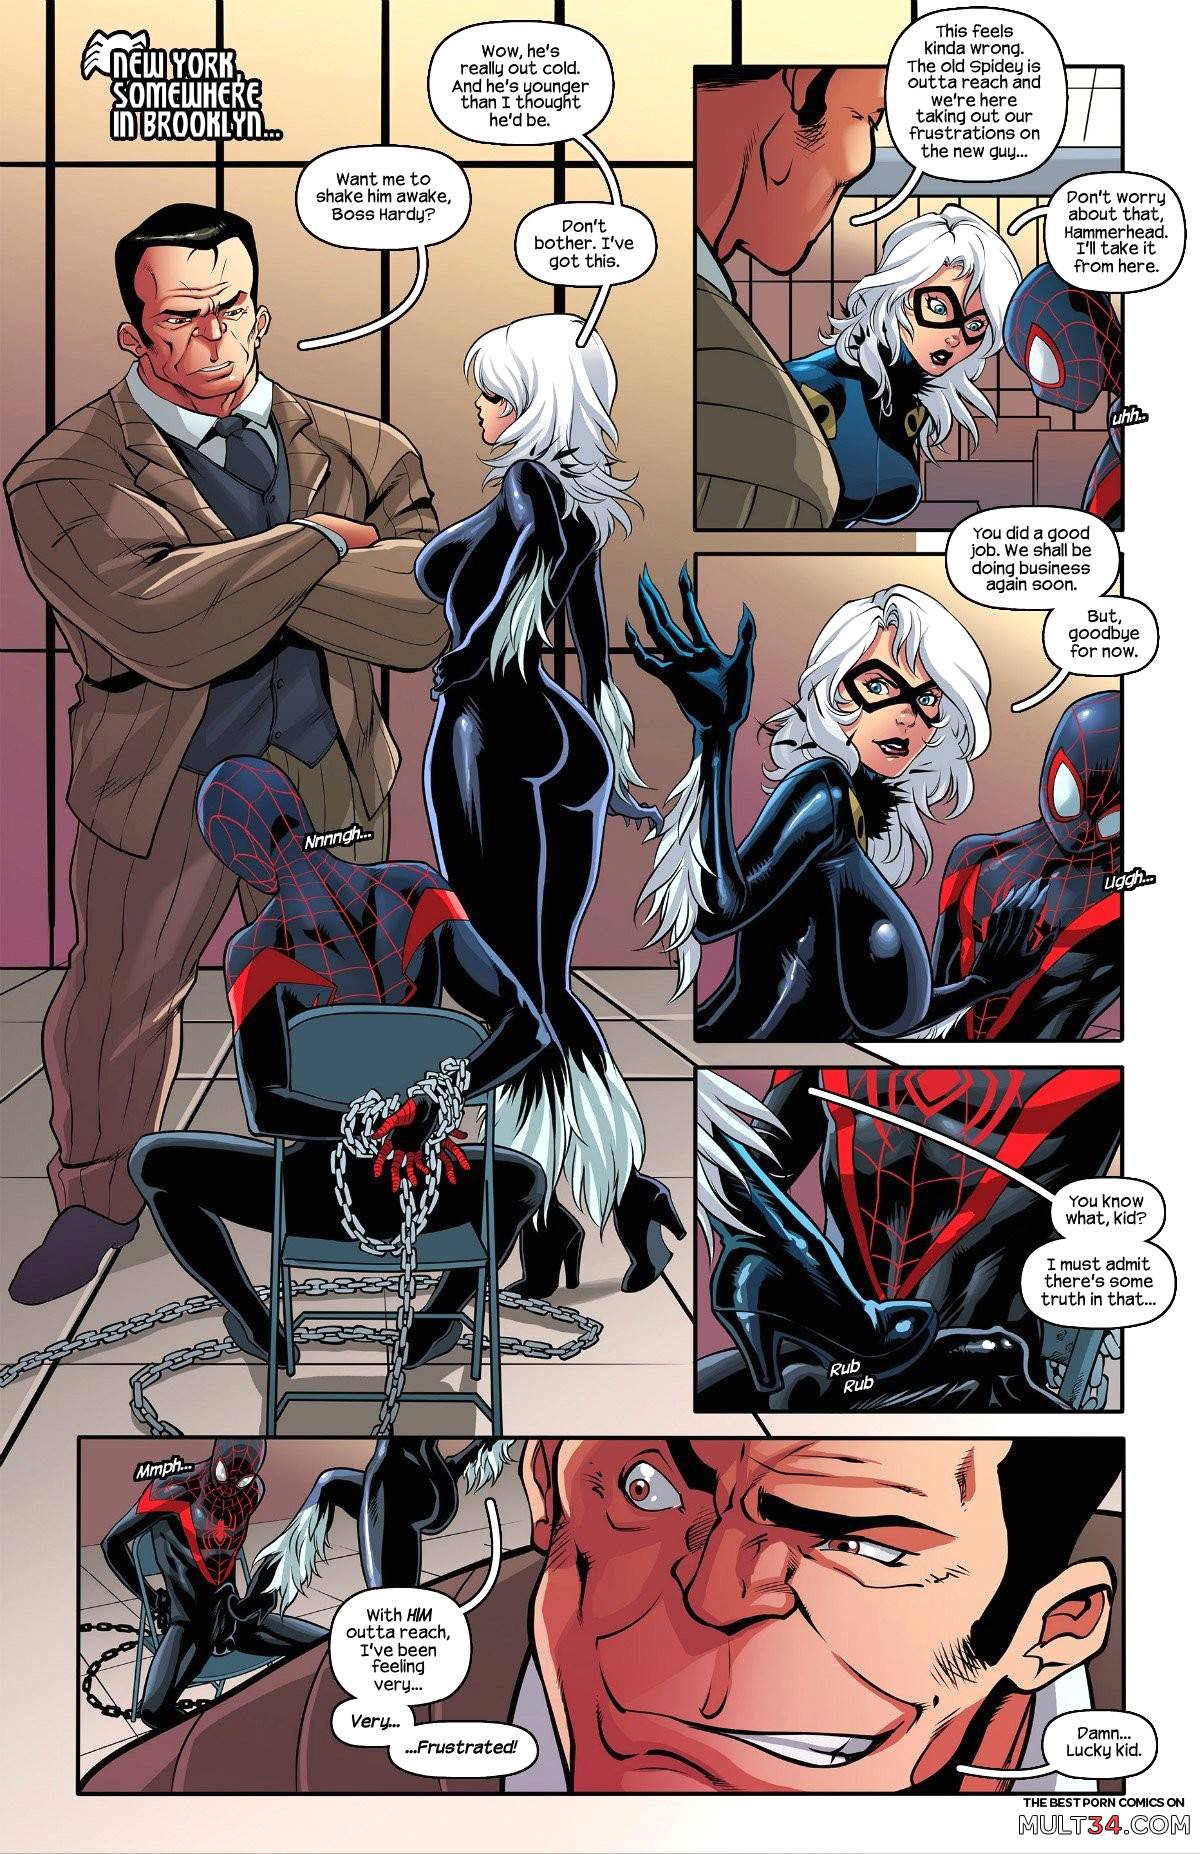 Miles Morales: The Ultimate Spider-Man #3 page 3